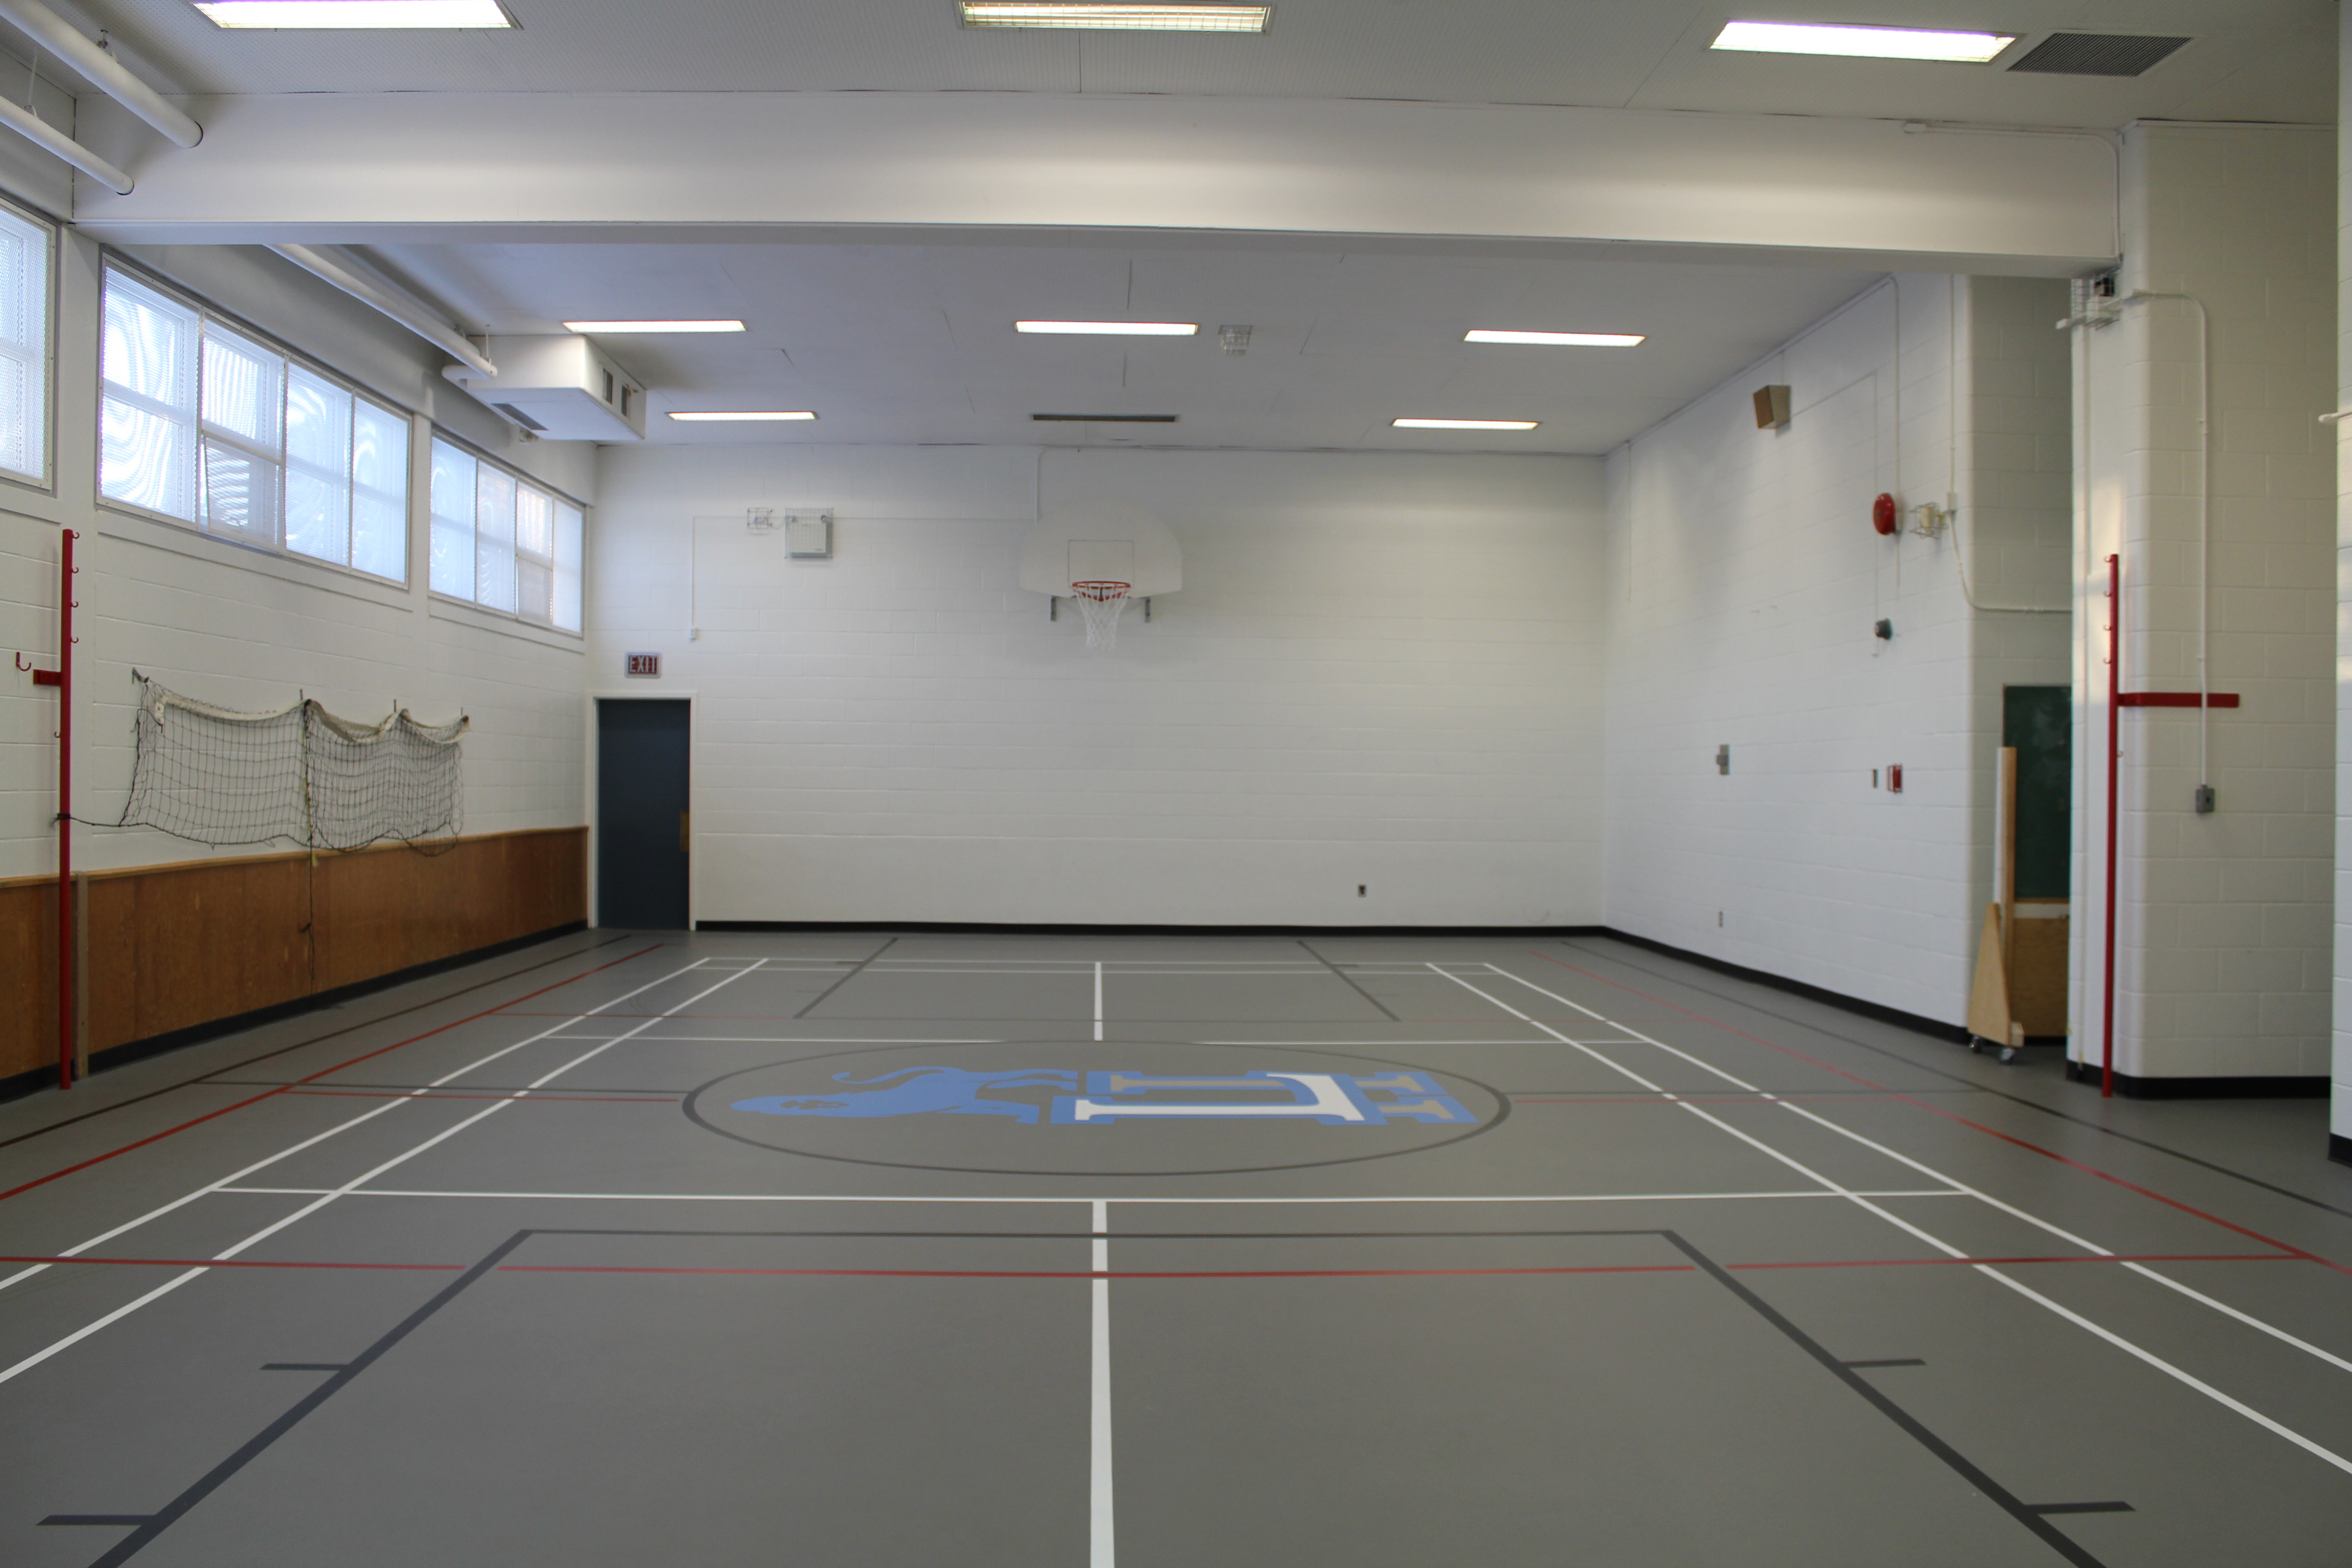 Our Small Gym Finished.